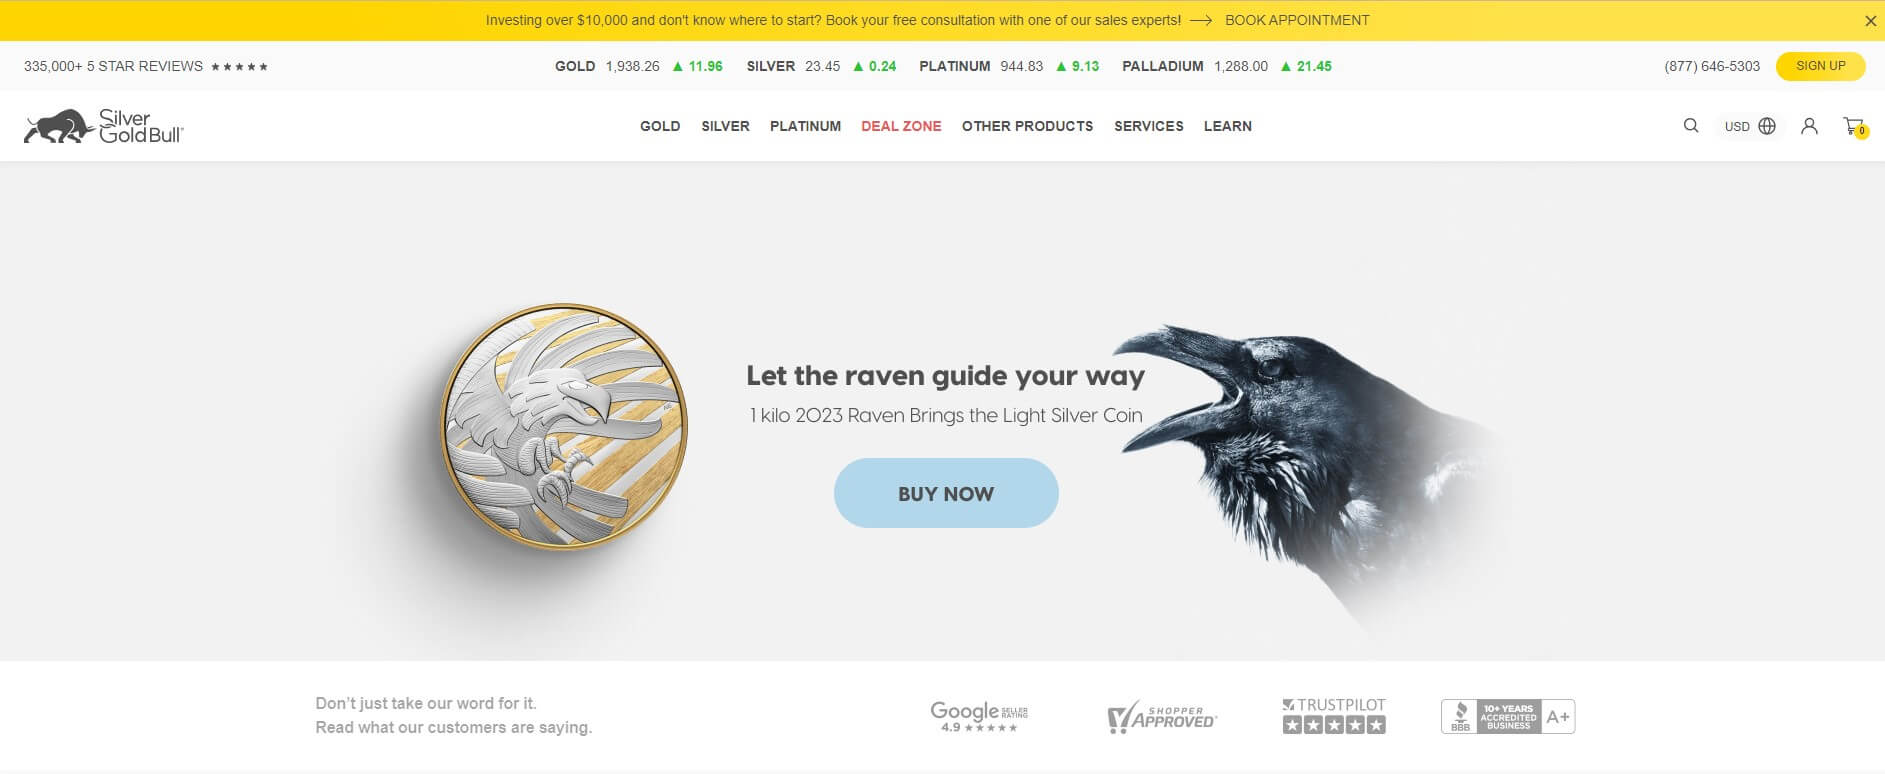 Silver Gold Bull Review - Website